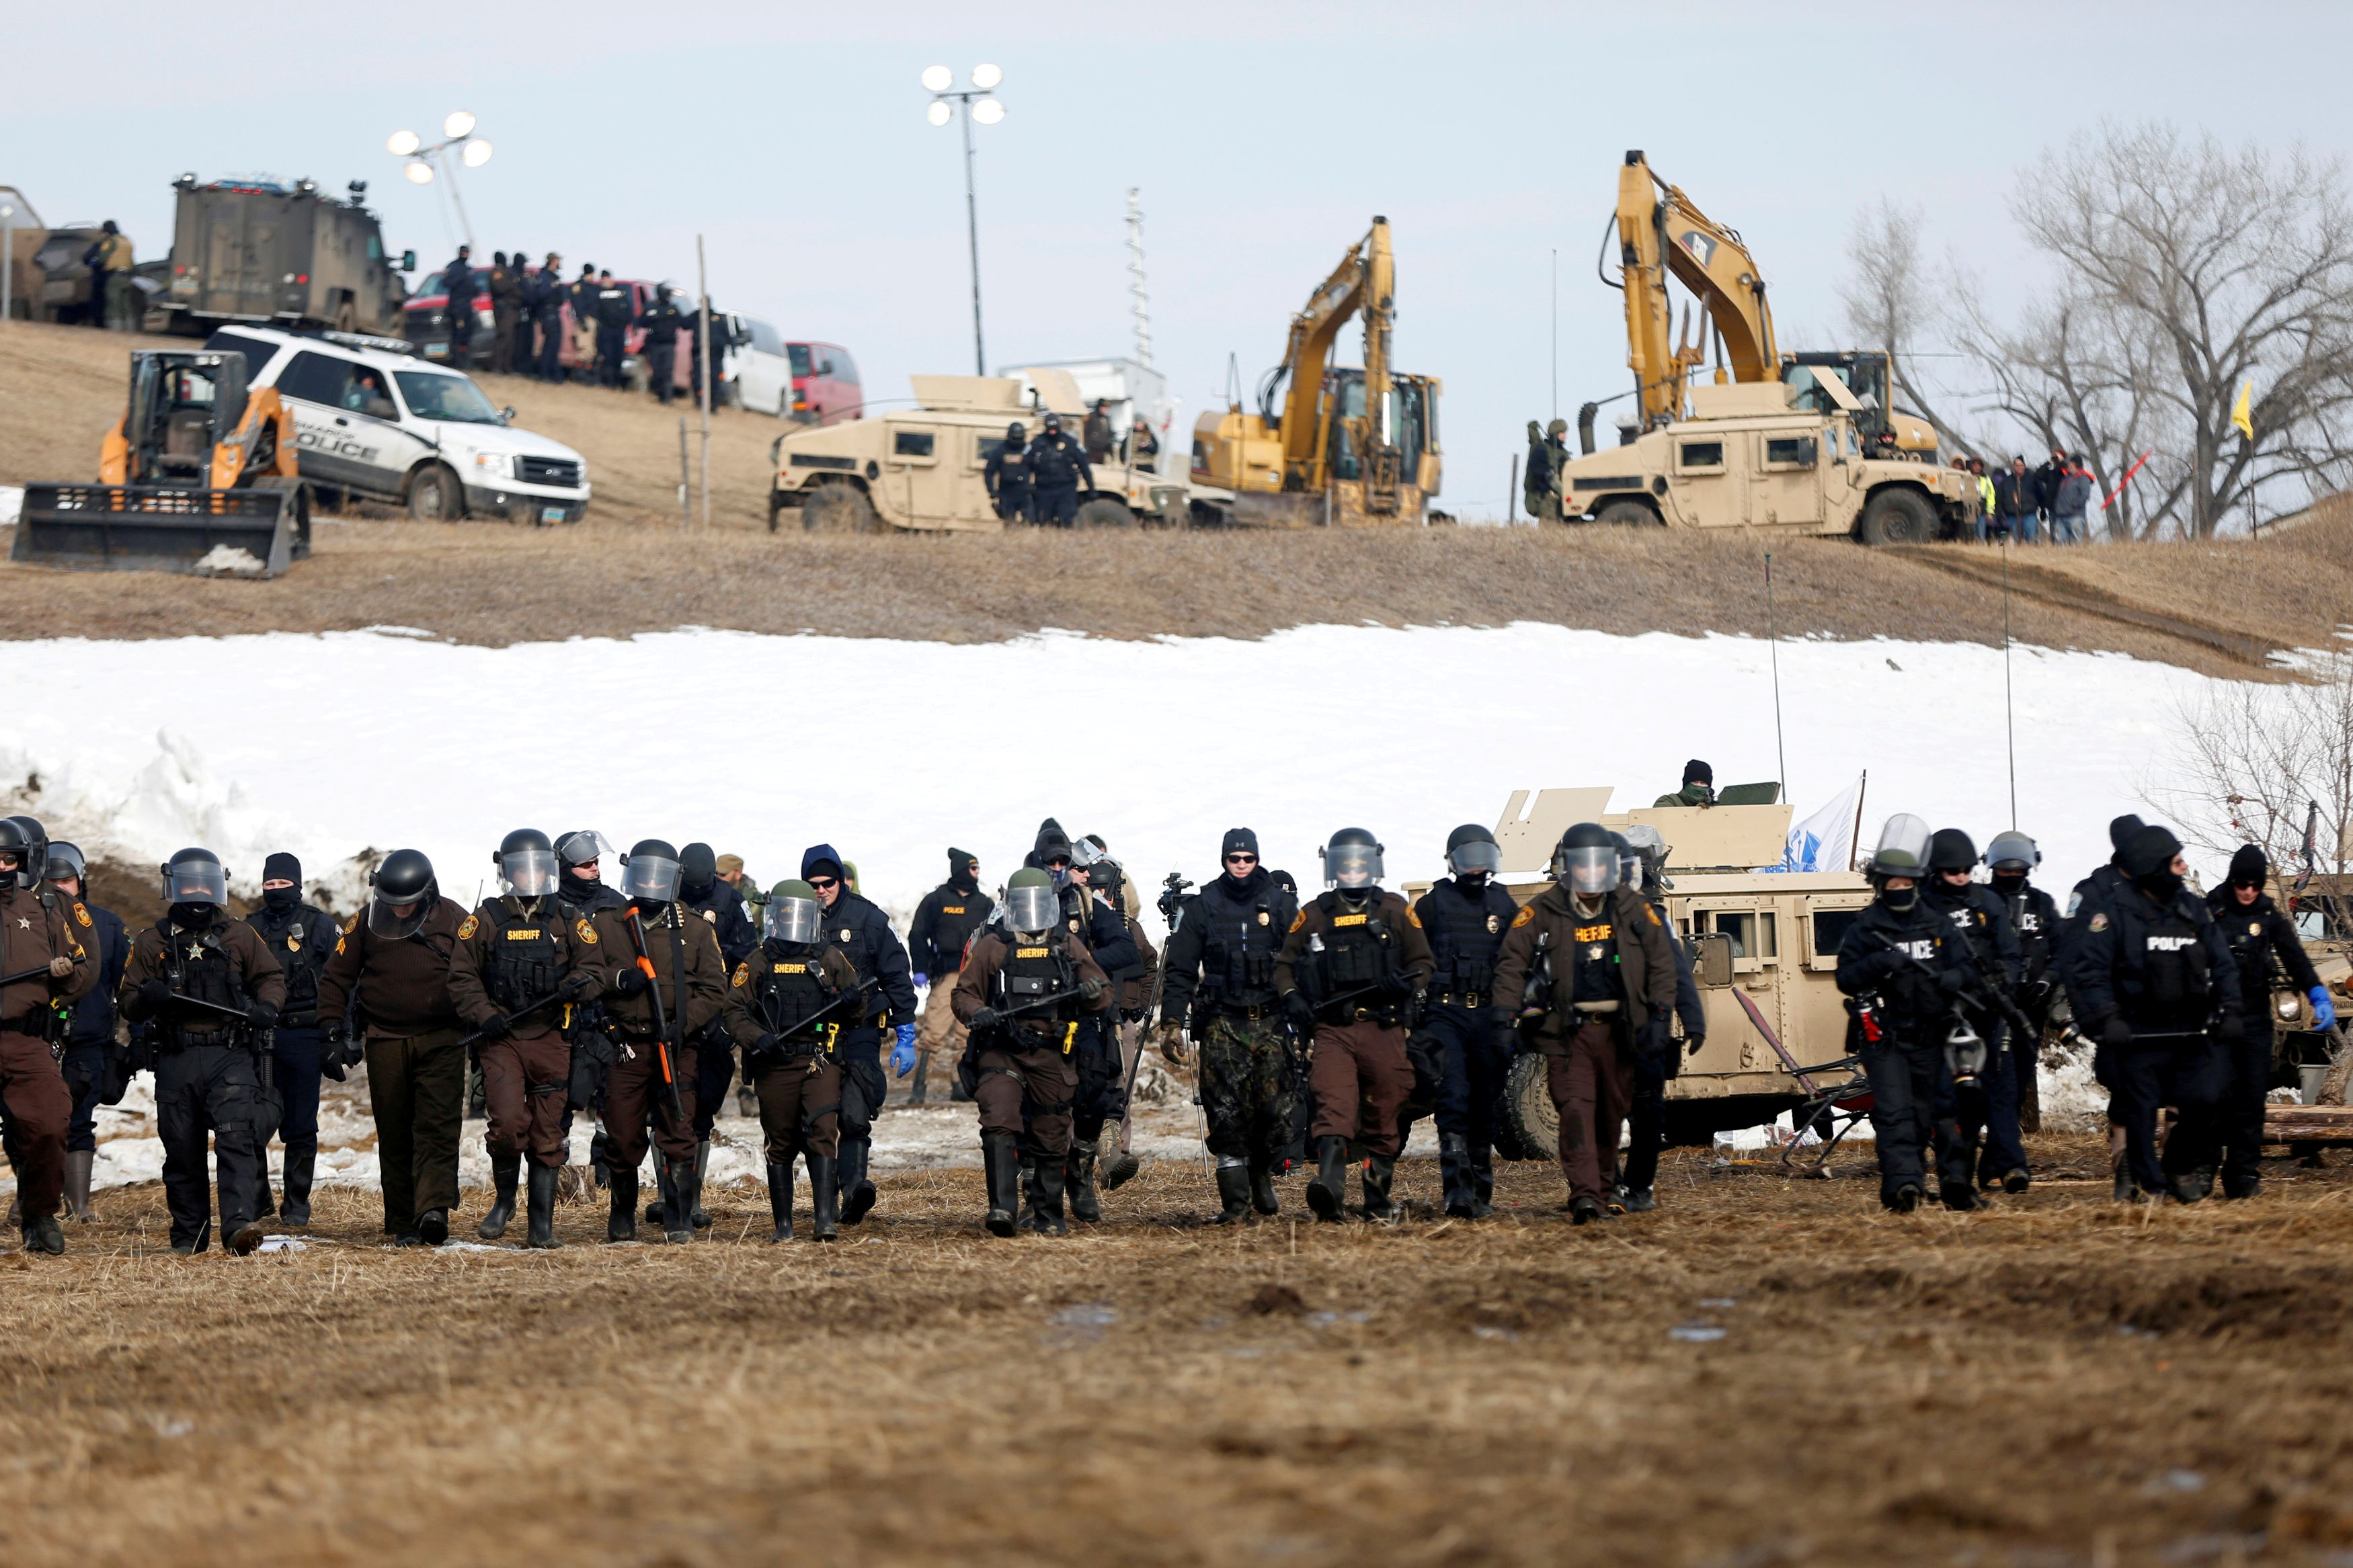 Law enforcement officers advance into the main opposition camp against the Dakota Access oil pipeline near Cannon Ball in 2017